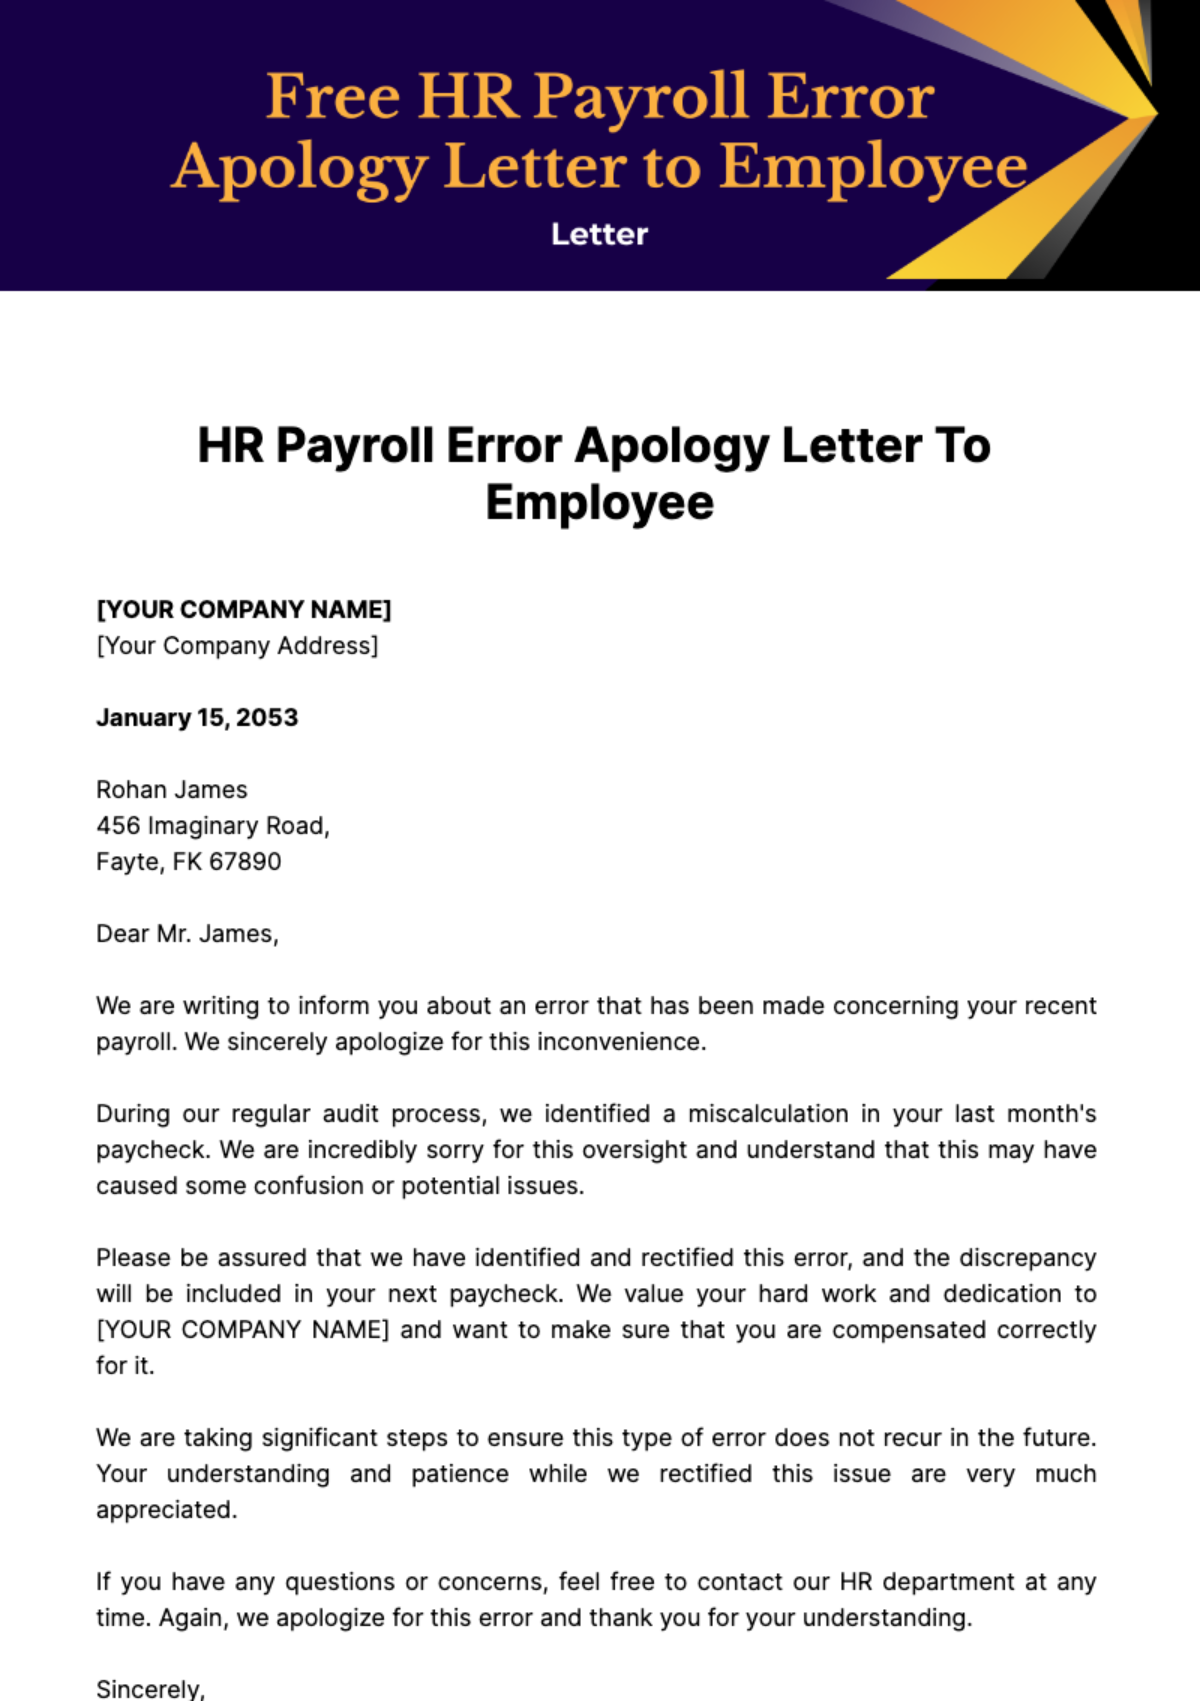 Free HR Payroll Error Apology Letter to Employee Template